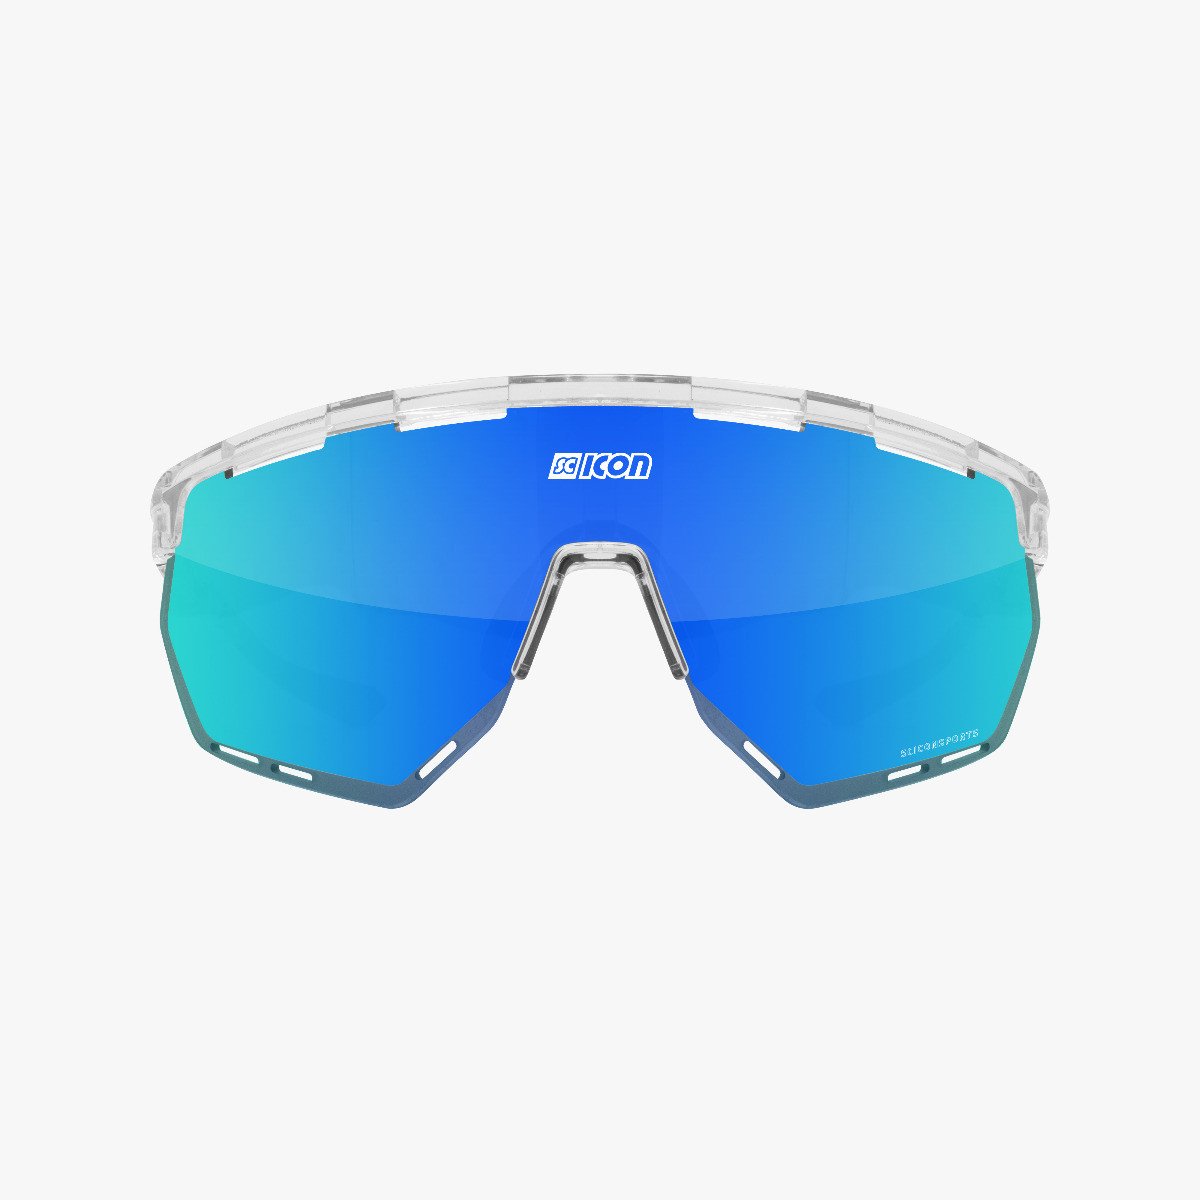 Scicon Sports | Aerowing Sport Performance Sunglasses - Crystal Gloss / Multimirror Blue - EY26030701